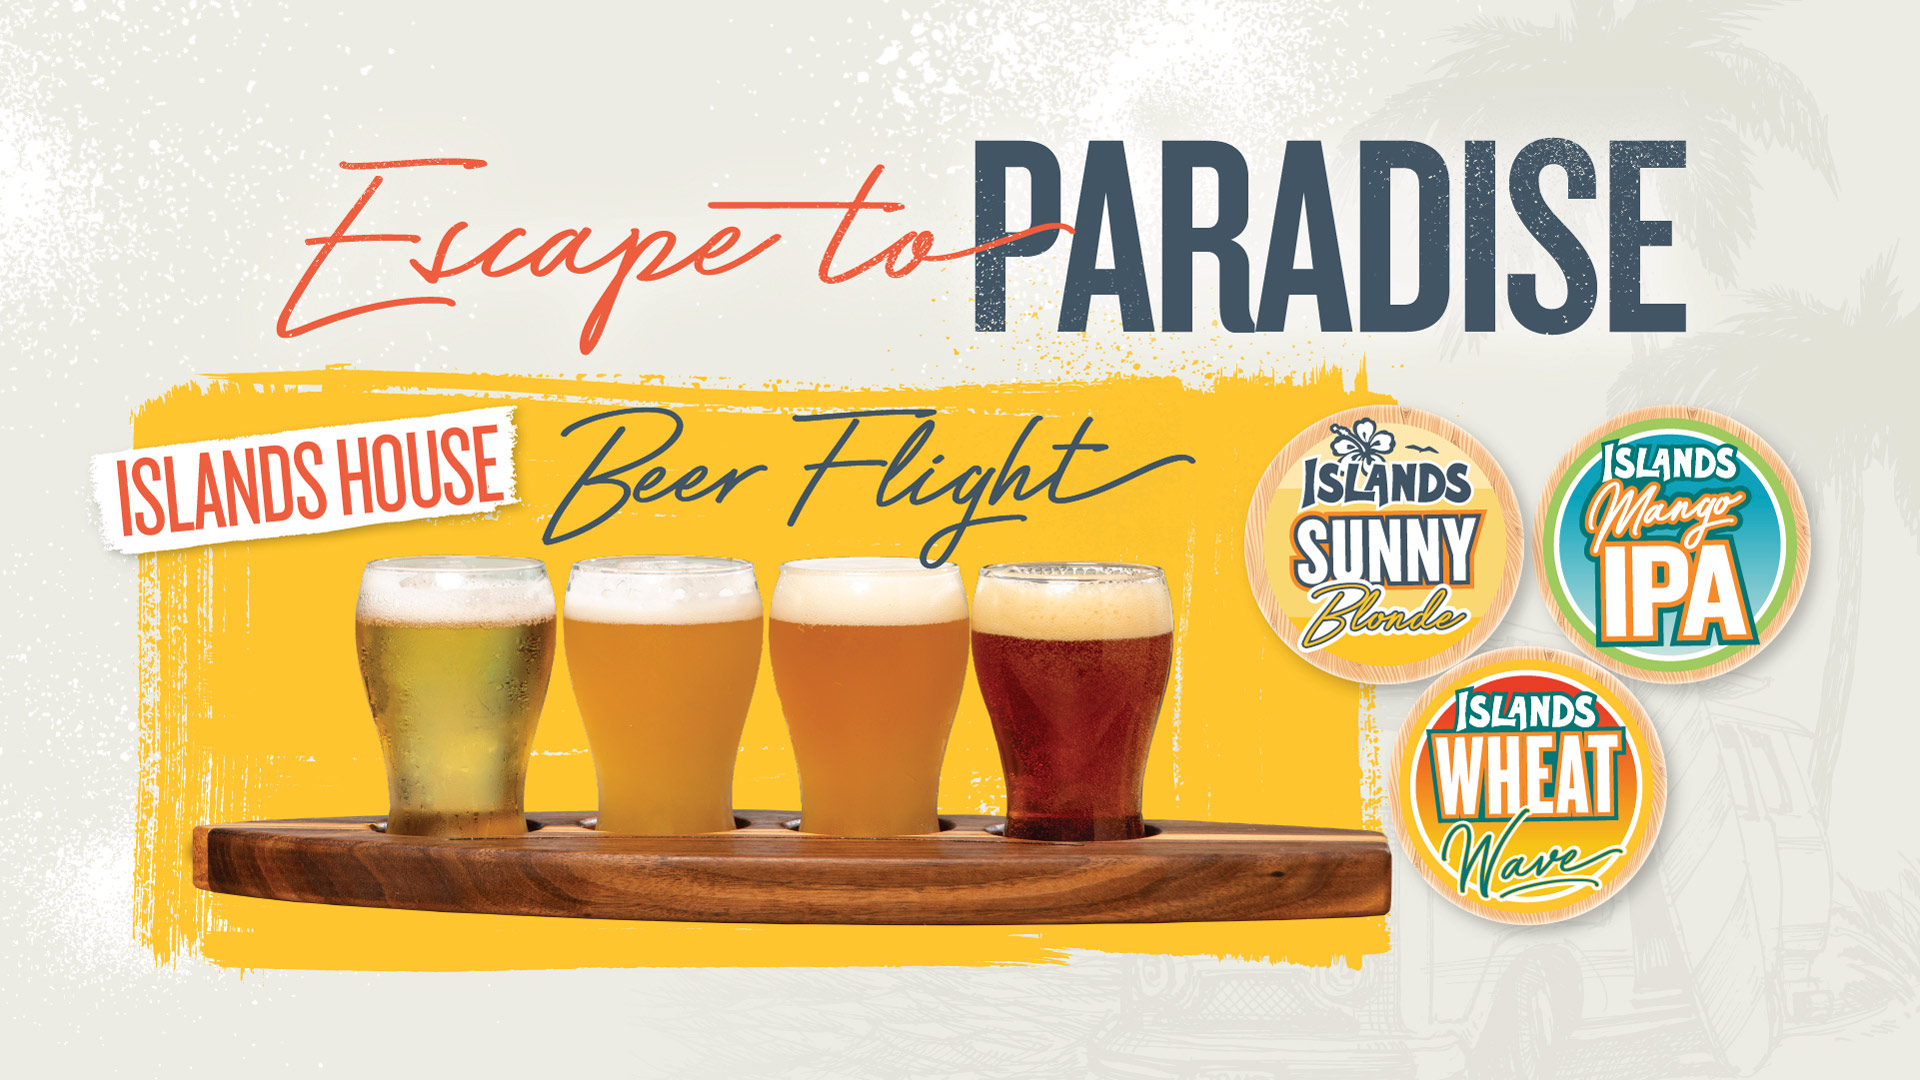 Escape to Paradise w/ an Islands Beer Flight!  Pairs well with Pretzel Bites.  Only available during Happy Hour.